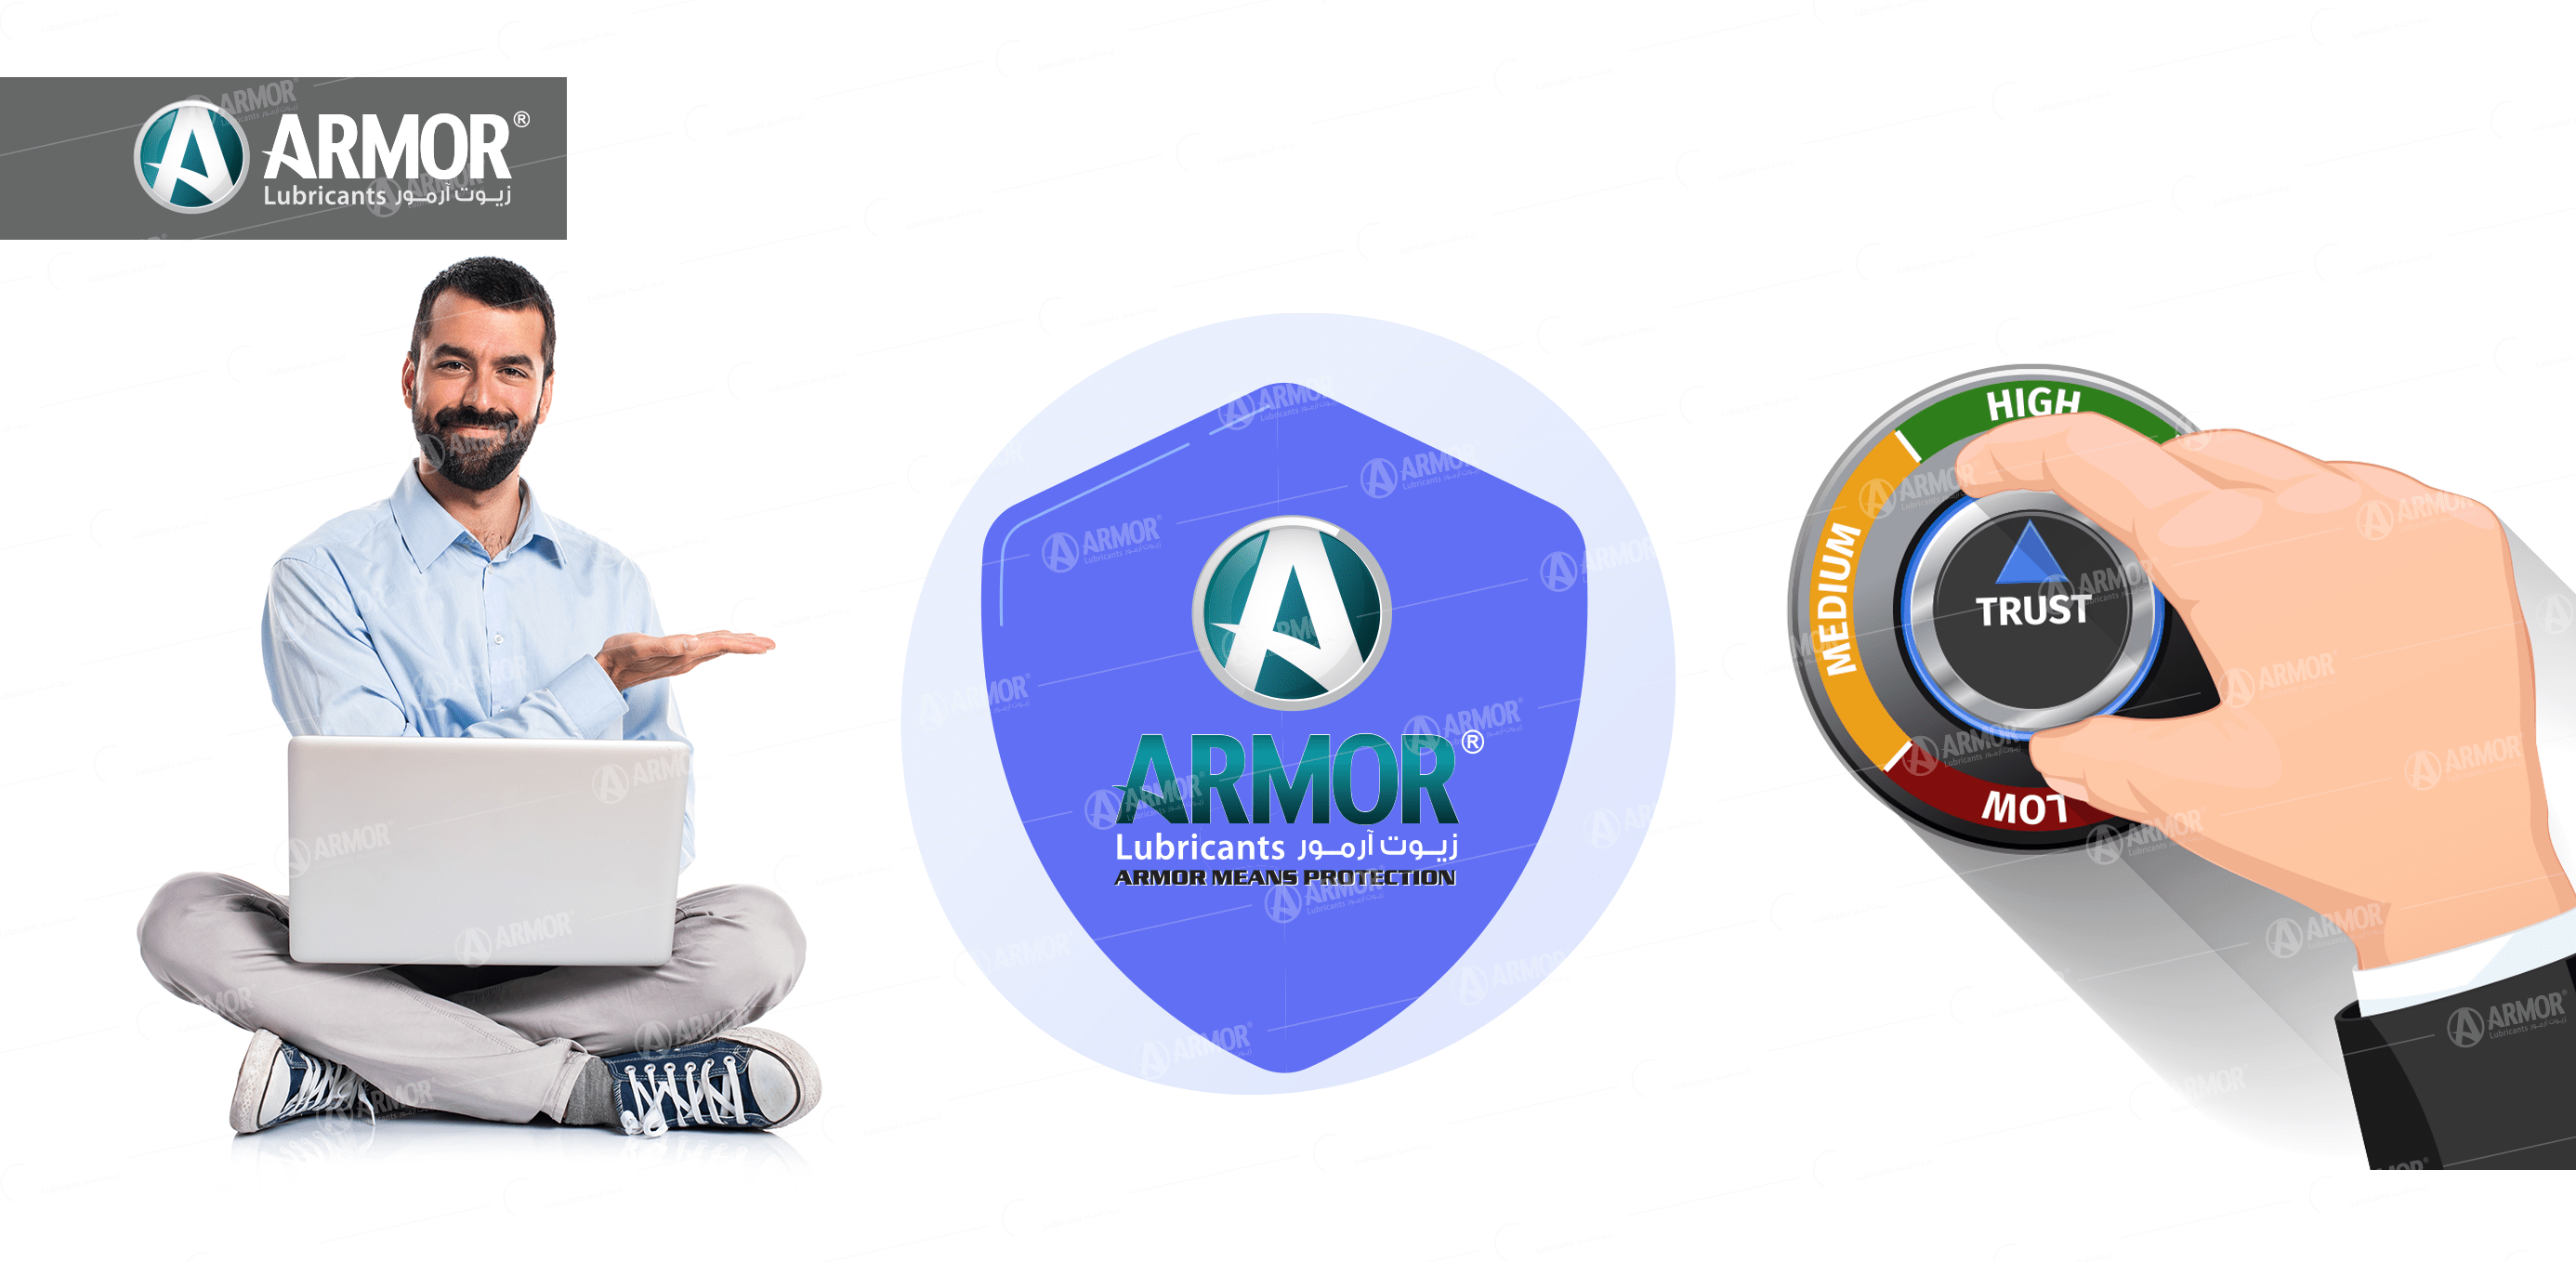 Armor Lubricants Manufacturer for High Performance lubricants